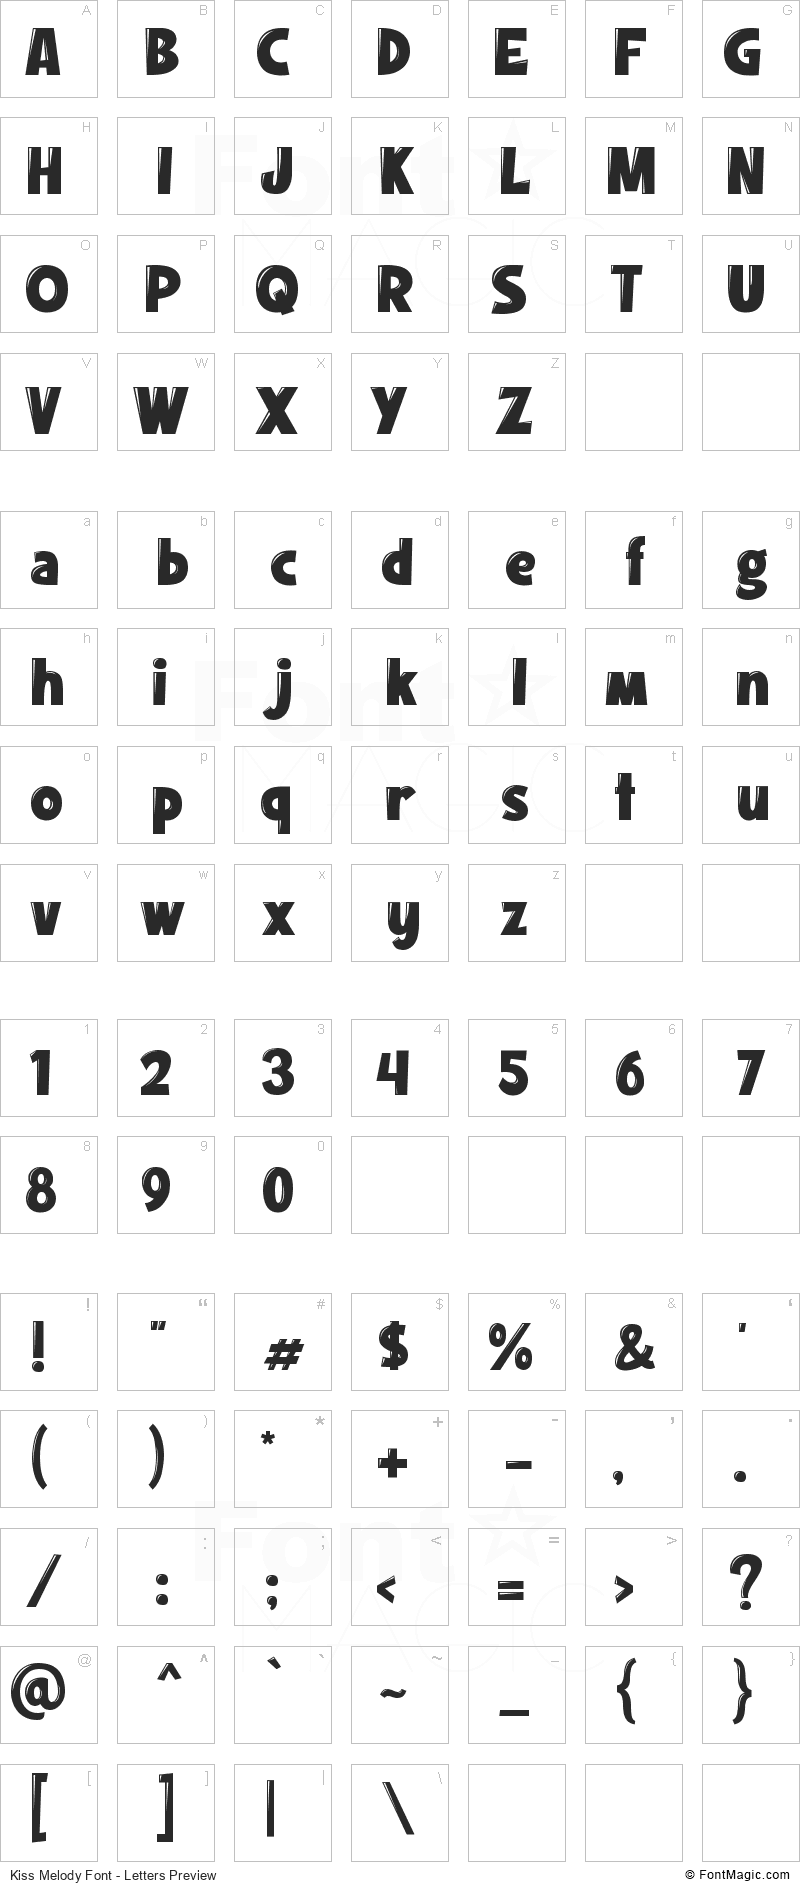 Kiss Melody Font - All Latters Preview Chart